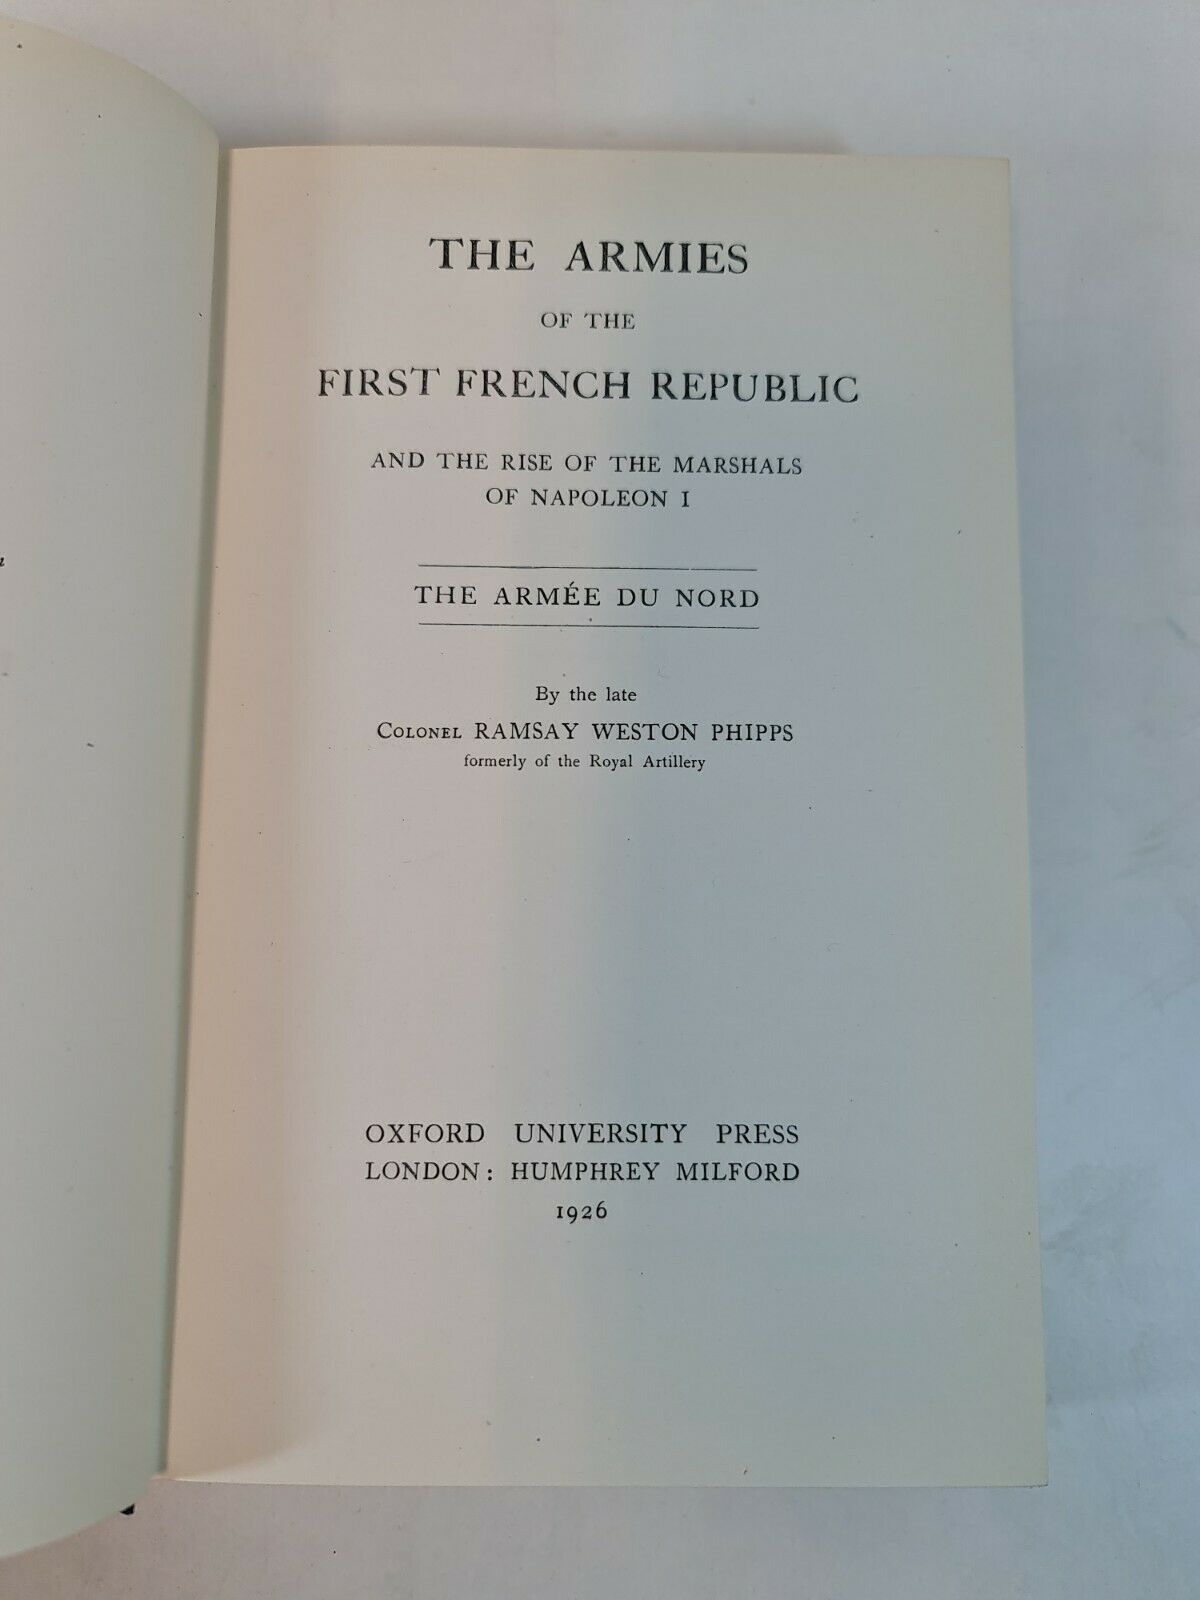 The Armies of the First French Republic Vol 1-5 by R.W. Phipps